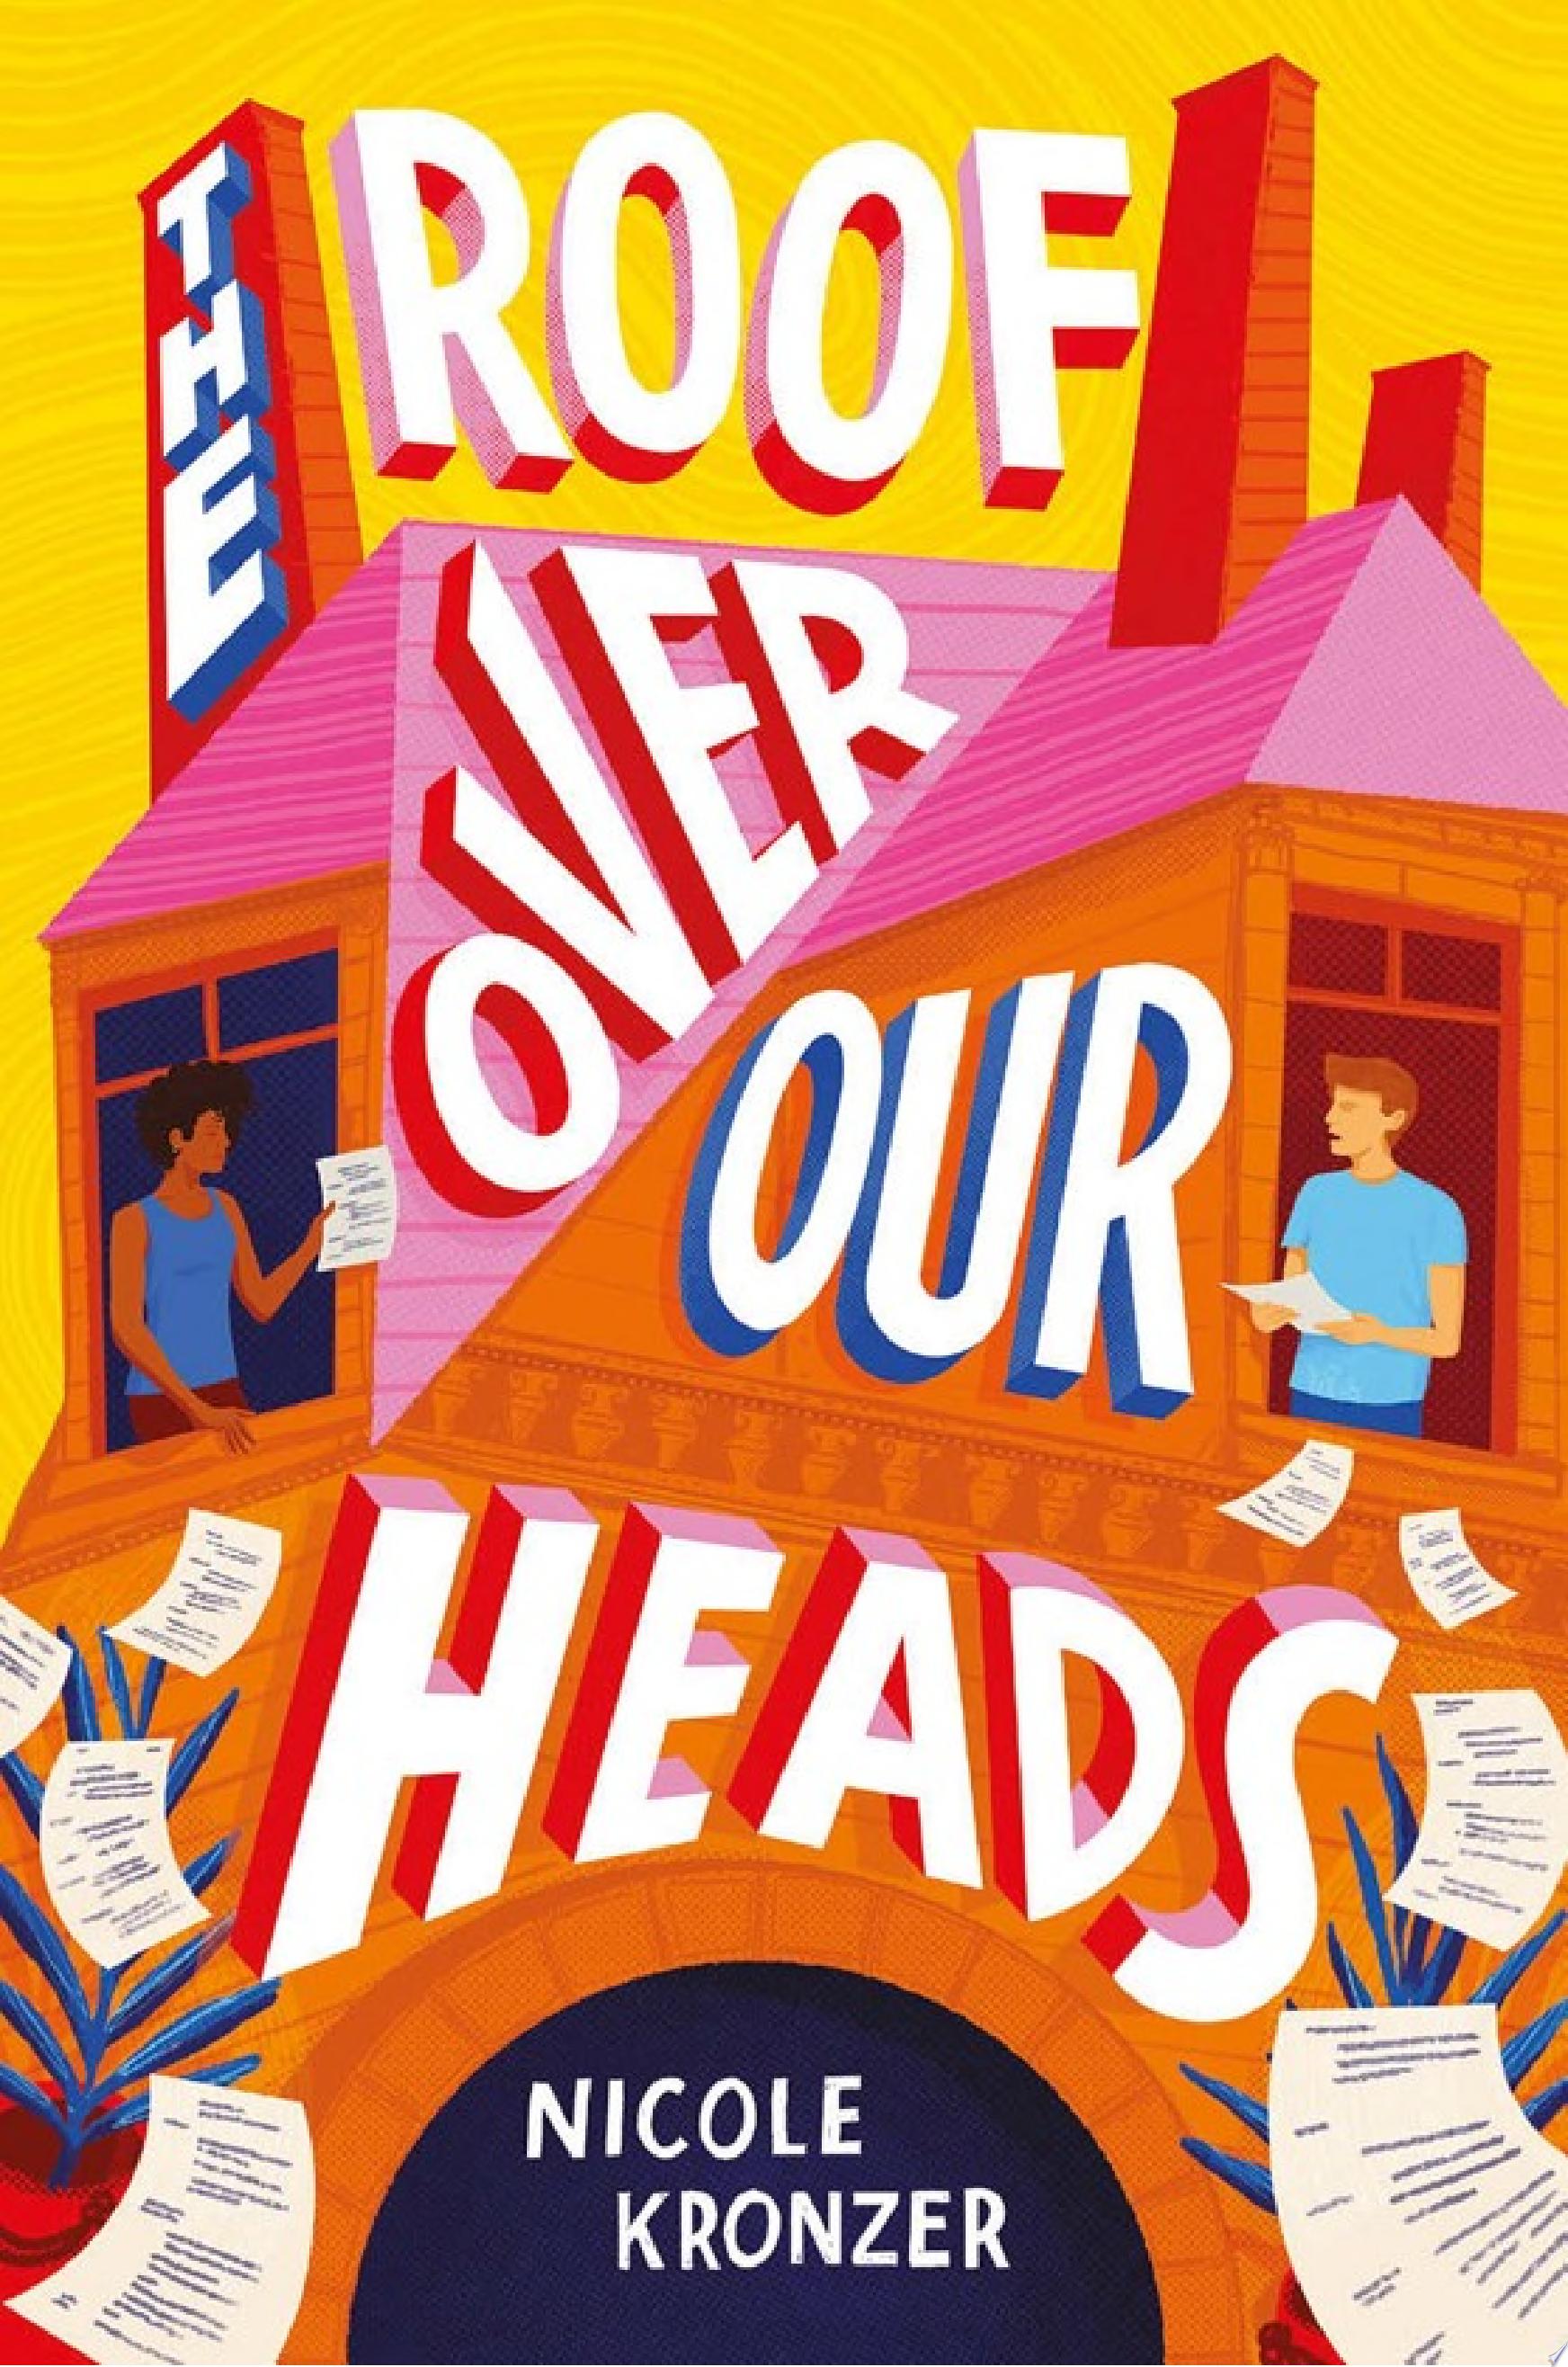 Image for "The Roof Over Our Heads"